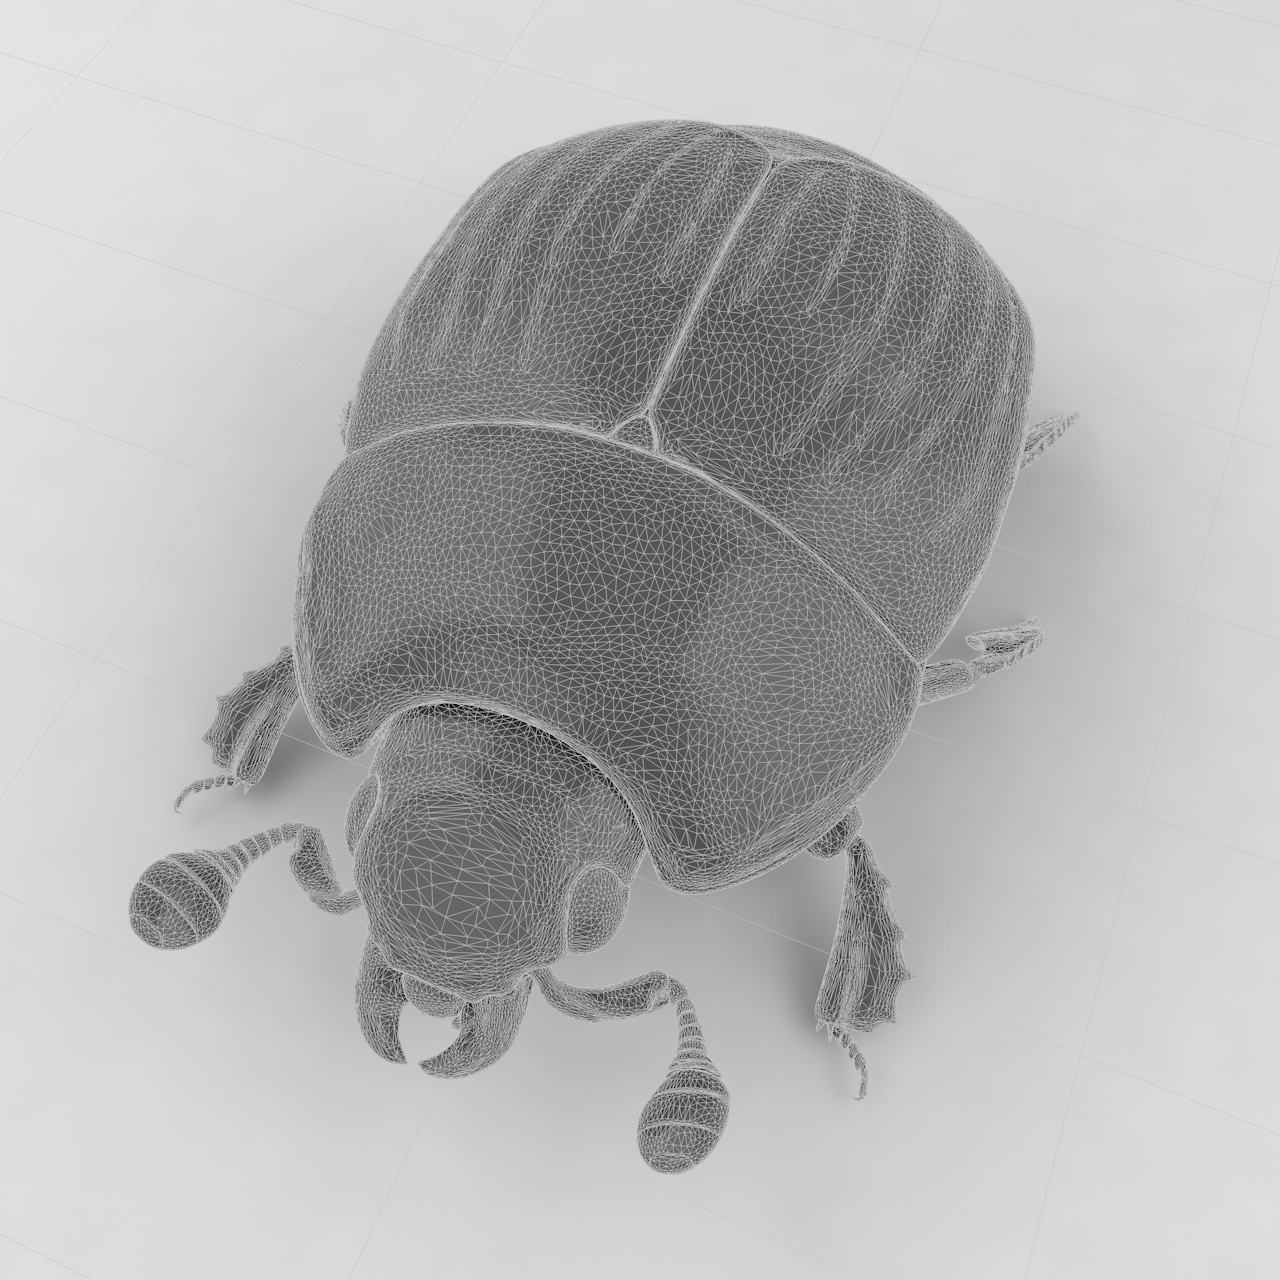 Hister beetle insect beetles 3d model